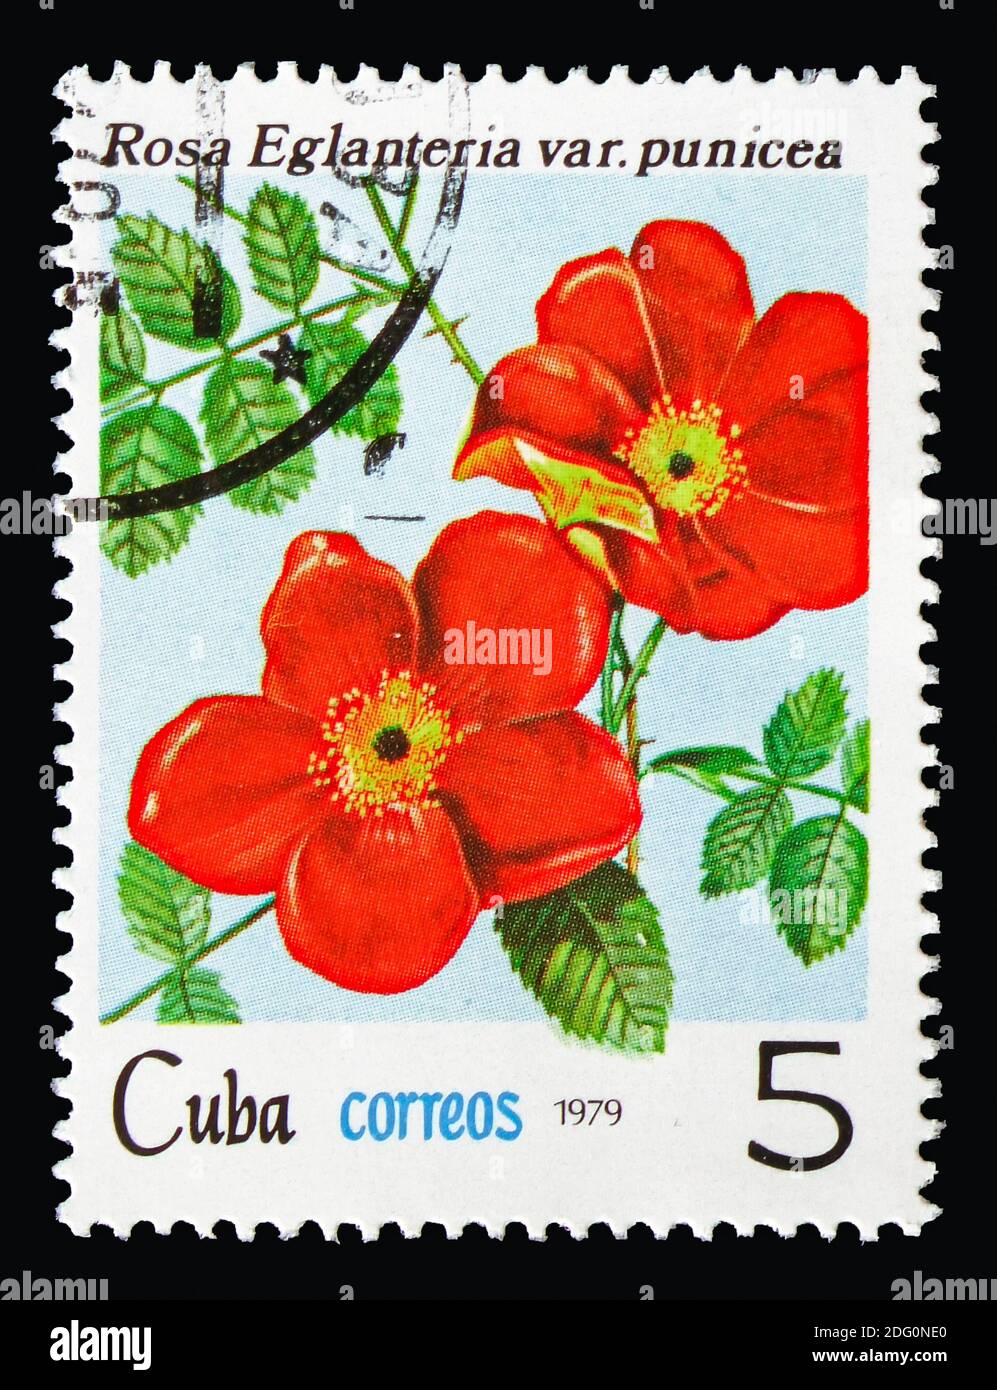 MOSCOW, RUSSIA - AUGUST 18, 2018: A stamp printed in Cuba shows Rosa rubiginosa var. punicea, Flowers - Roses serie, circa 1979 Stock Photo